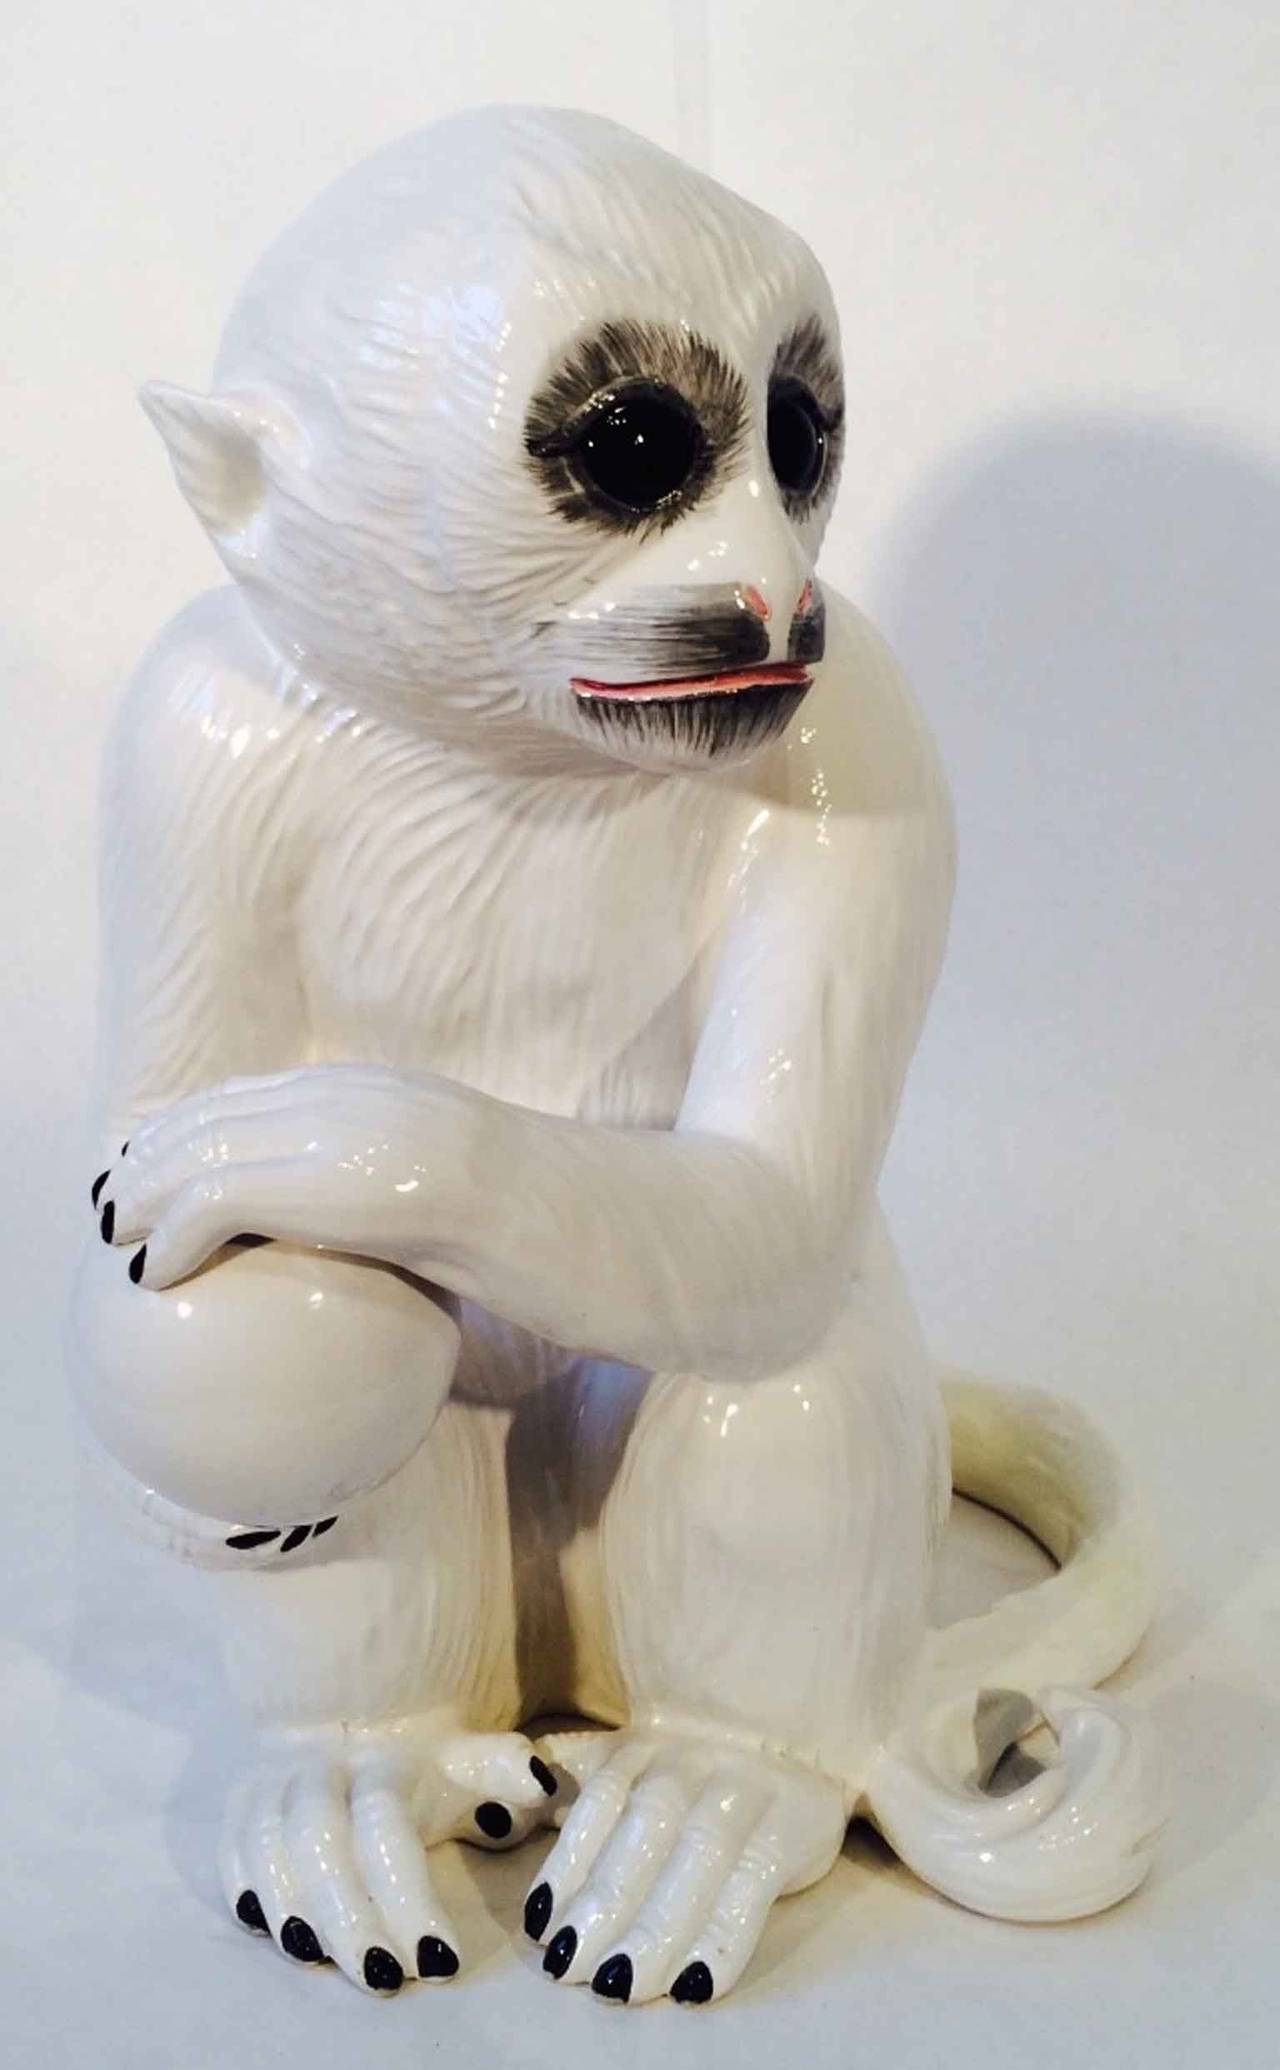 Whimsical lifesize white glazed ceramic sculpture of a monkey holding a ball. Authentic item made in Italy. Pristine.